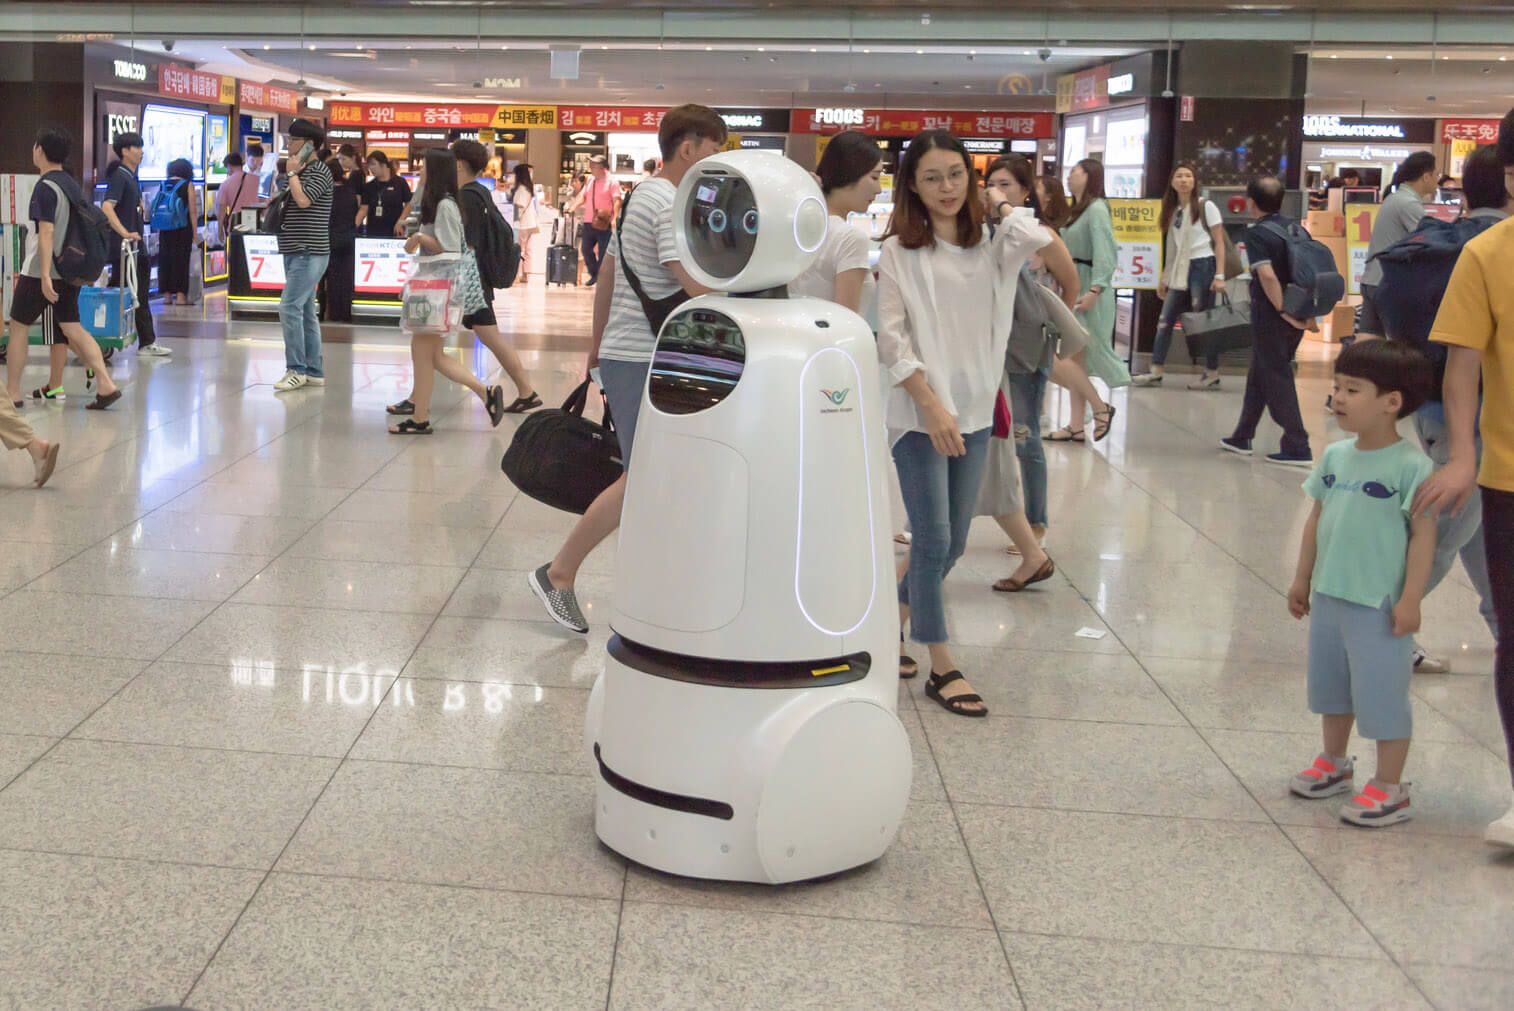 A retail robot roams in a crowded mall